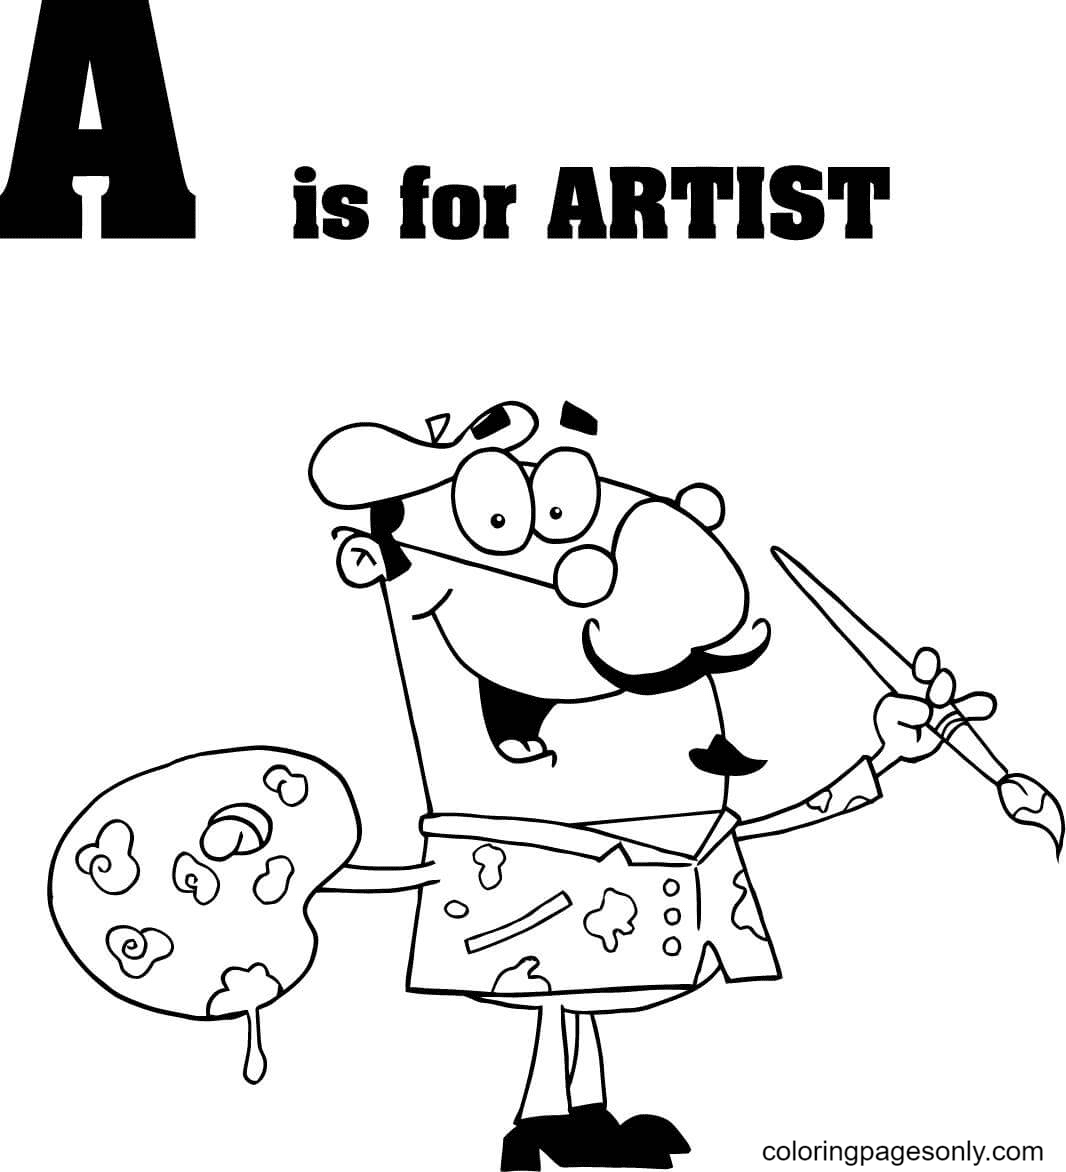 Letter A is for Artist Coloring Page